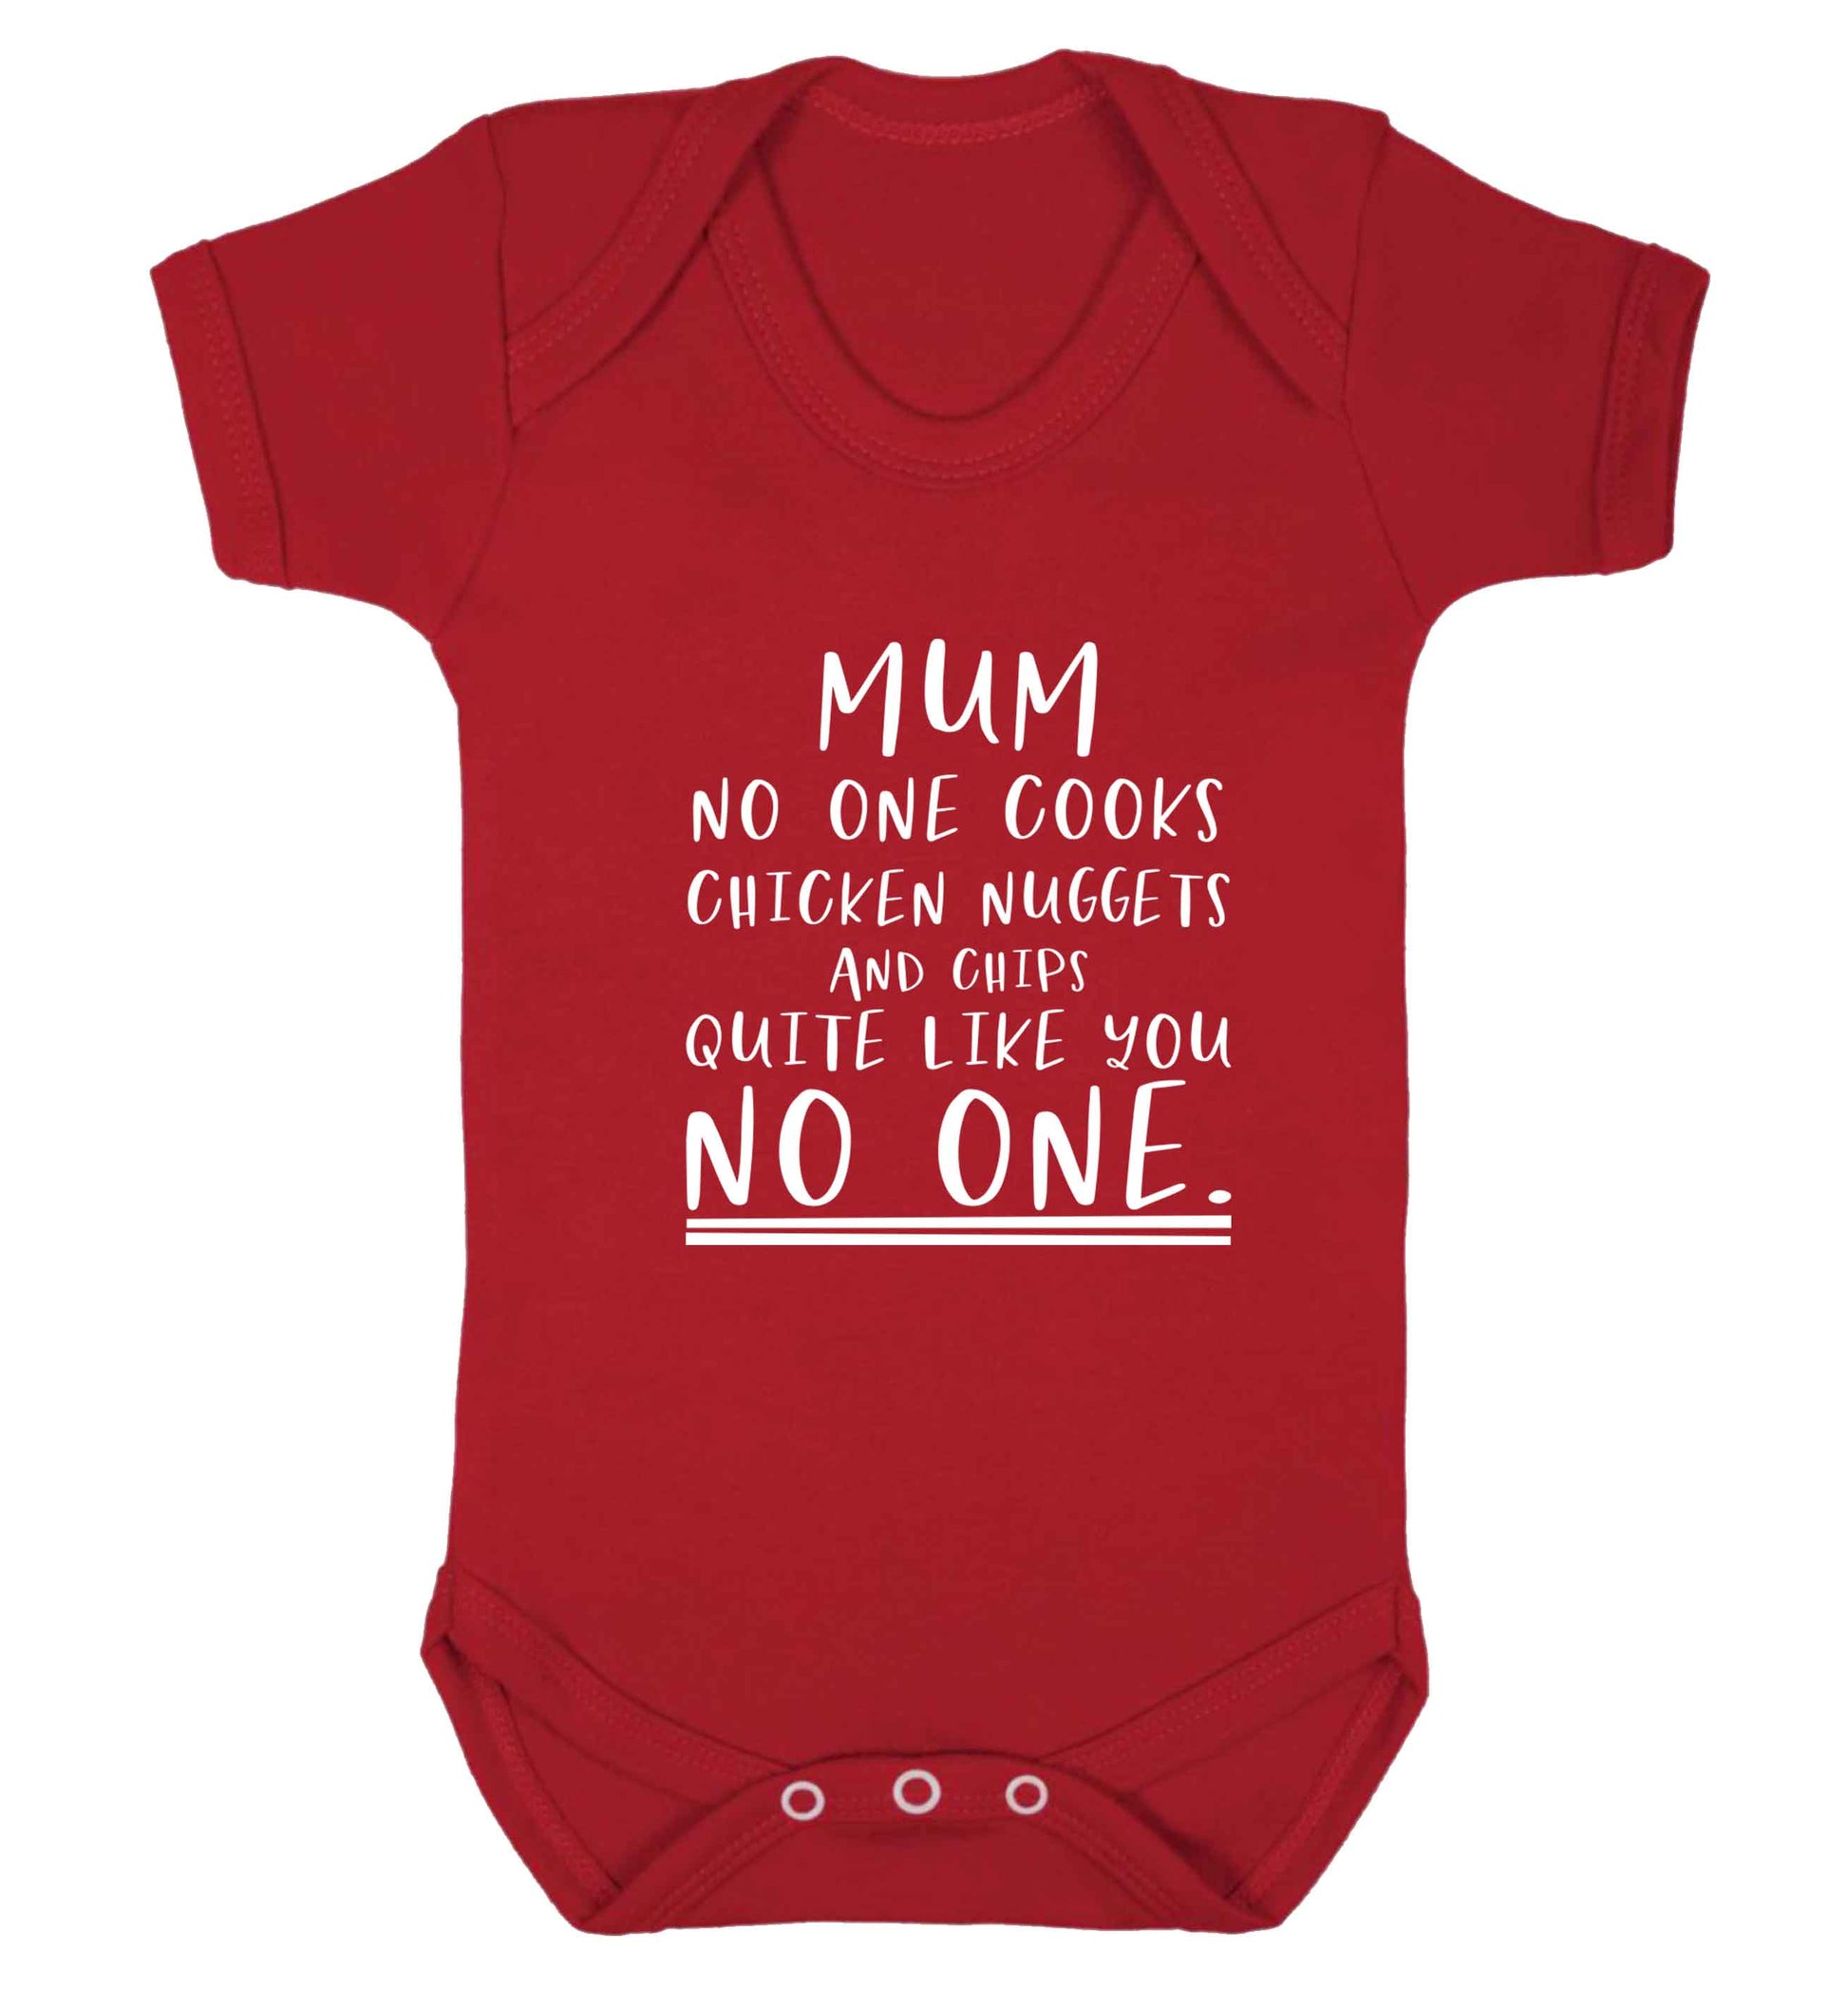 Super funny sassy gift for mother's day or birthday!  Mum no one cooks chicken nuggets and chips like you no one baby vest red 18-24 months